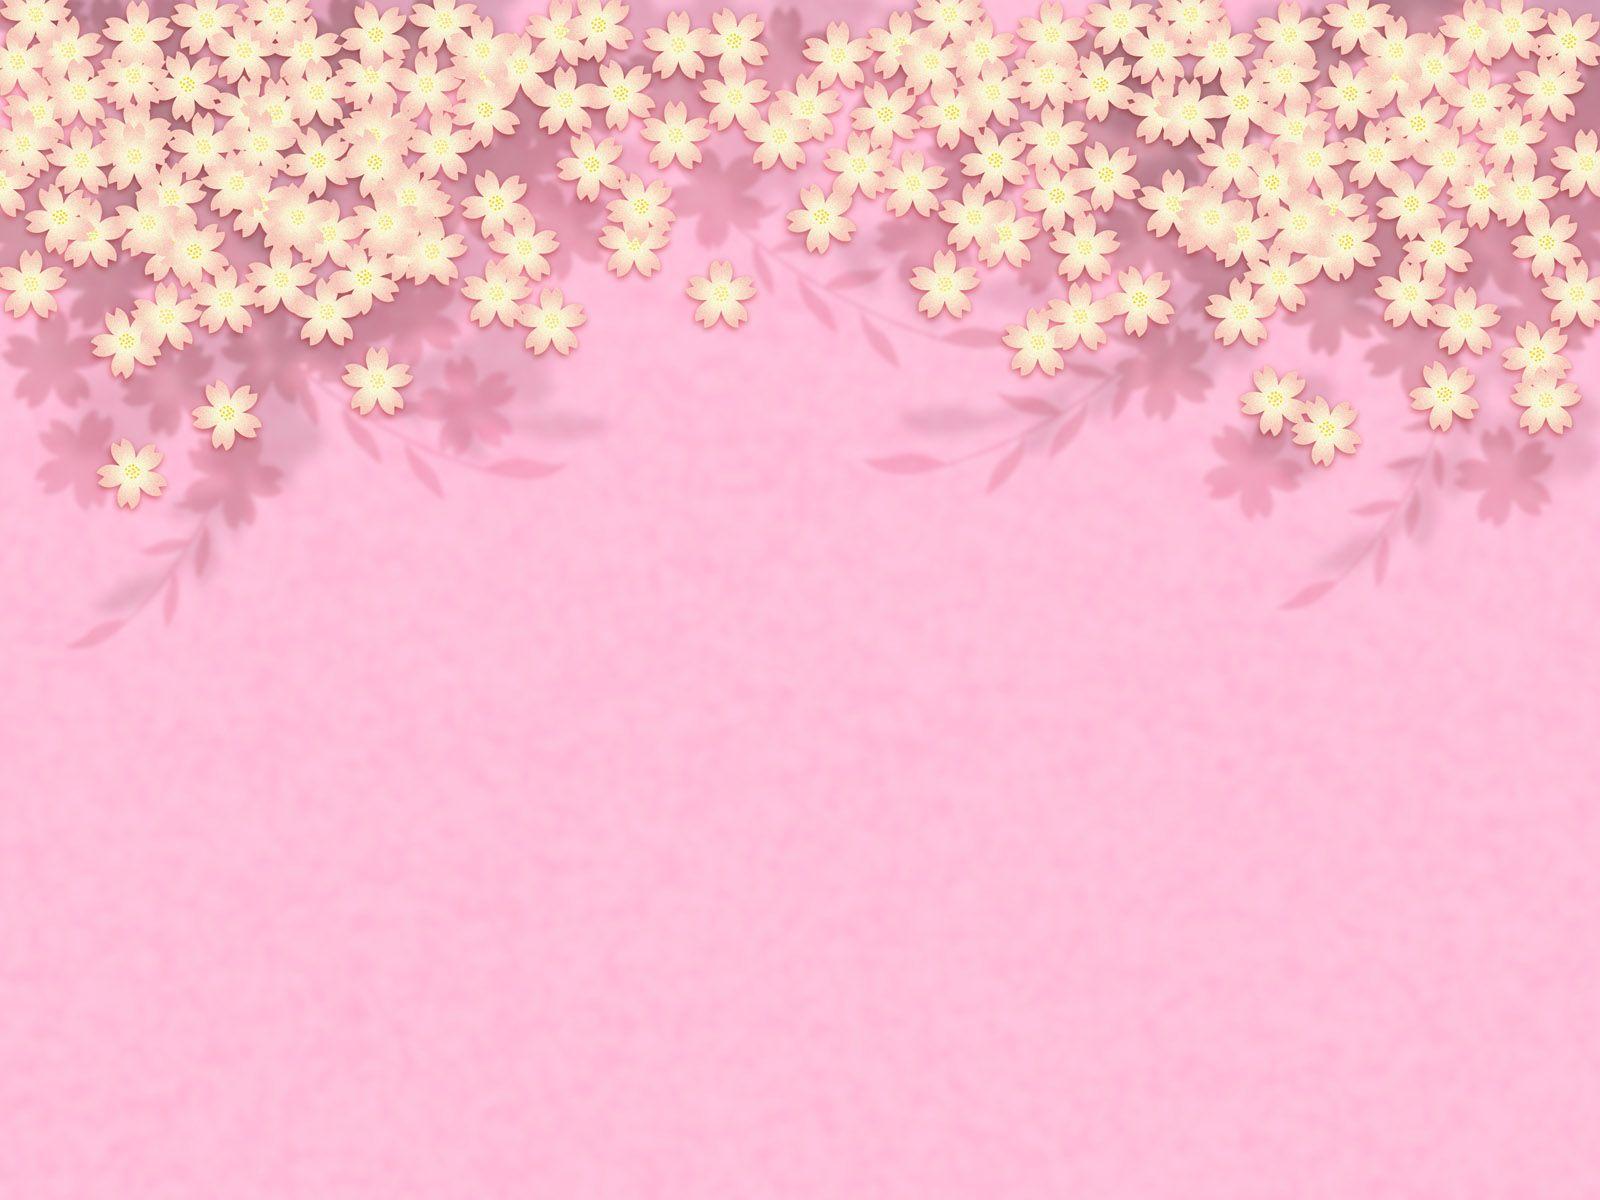 Pink Lace Wallpaper, HD Quality Pink Lace Image, Pink Lace